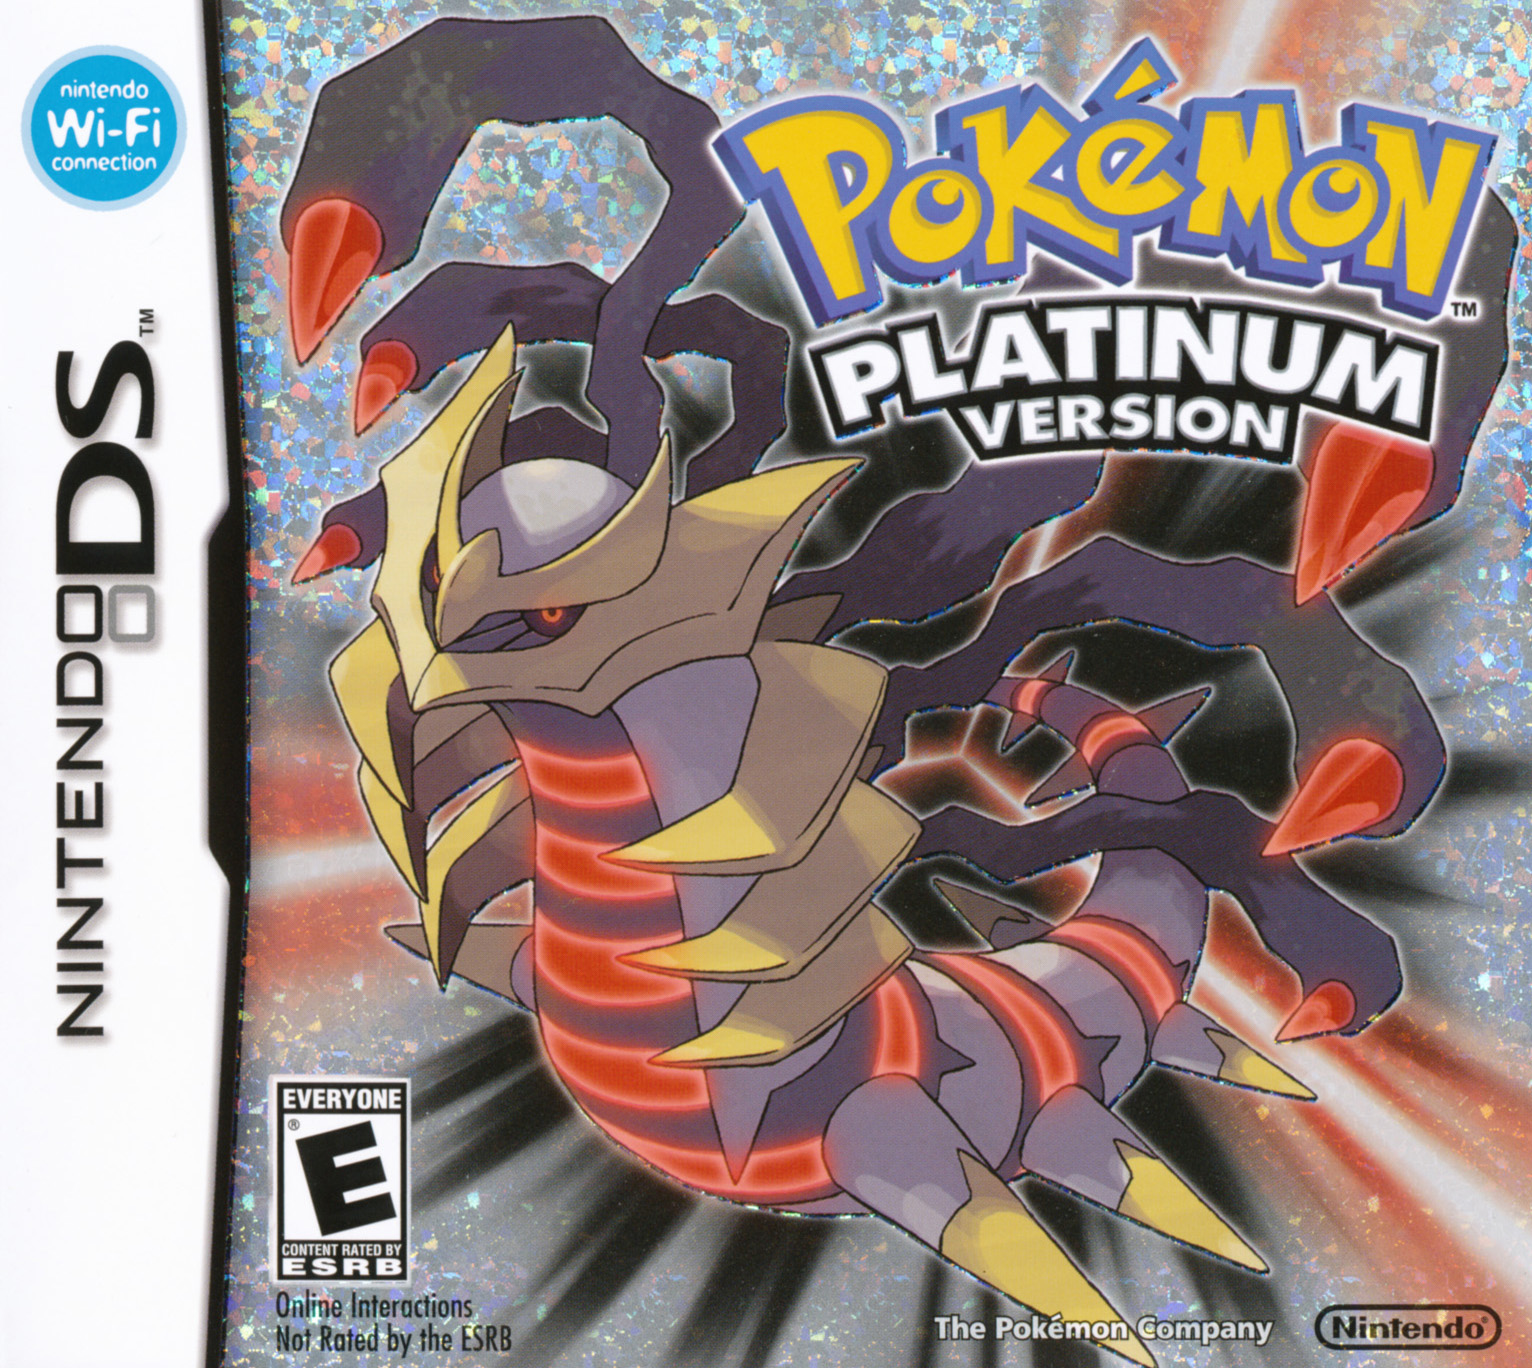 the box art for pokemon platinum. it features giratina on a glittery, red-white-and-black starburst background